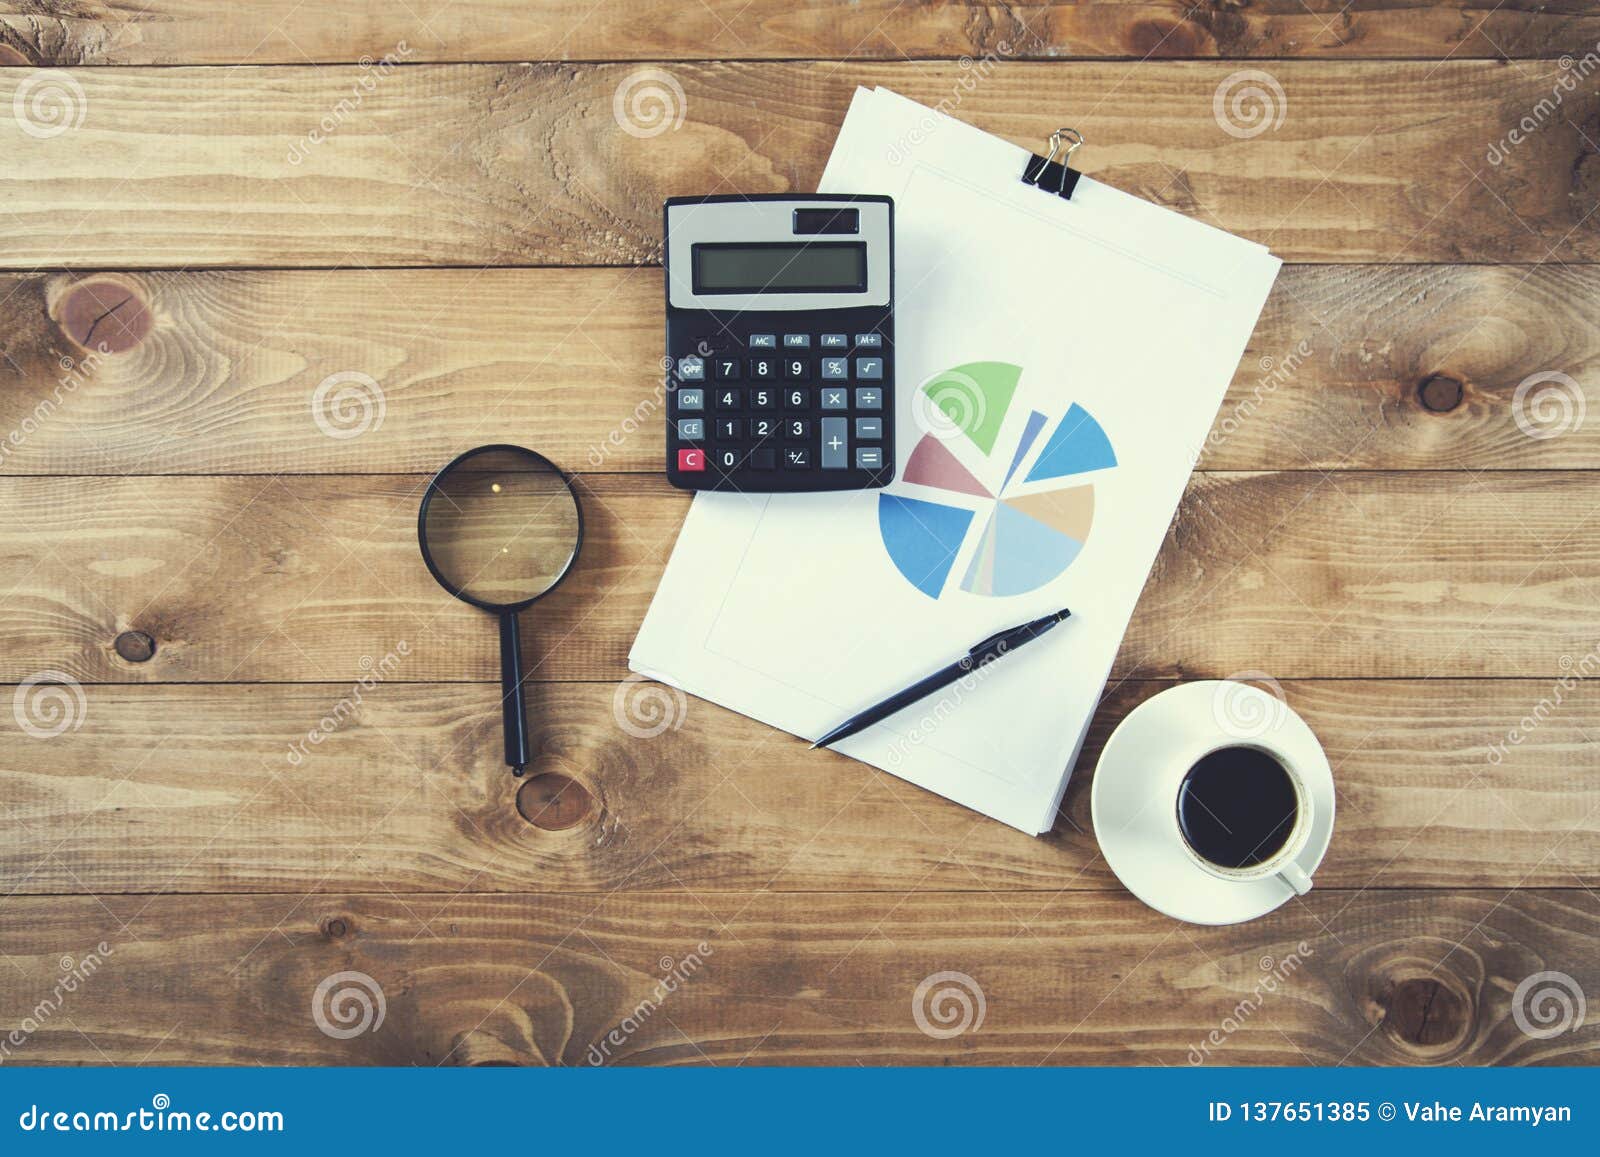 Money On Graph With Calculator Stock Image - Image of bank ...